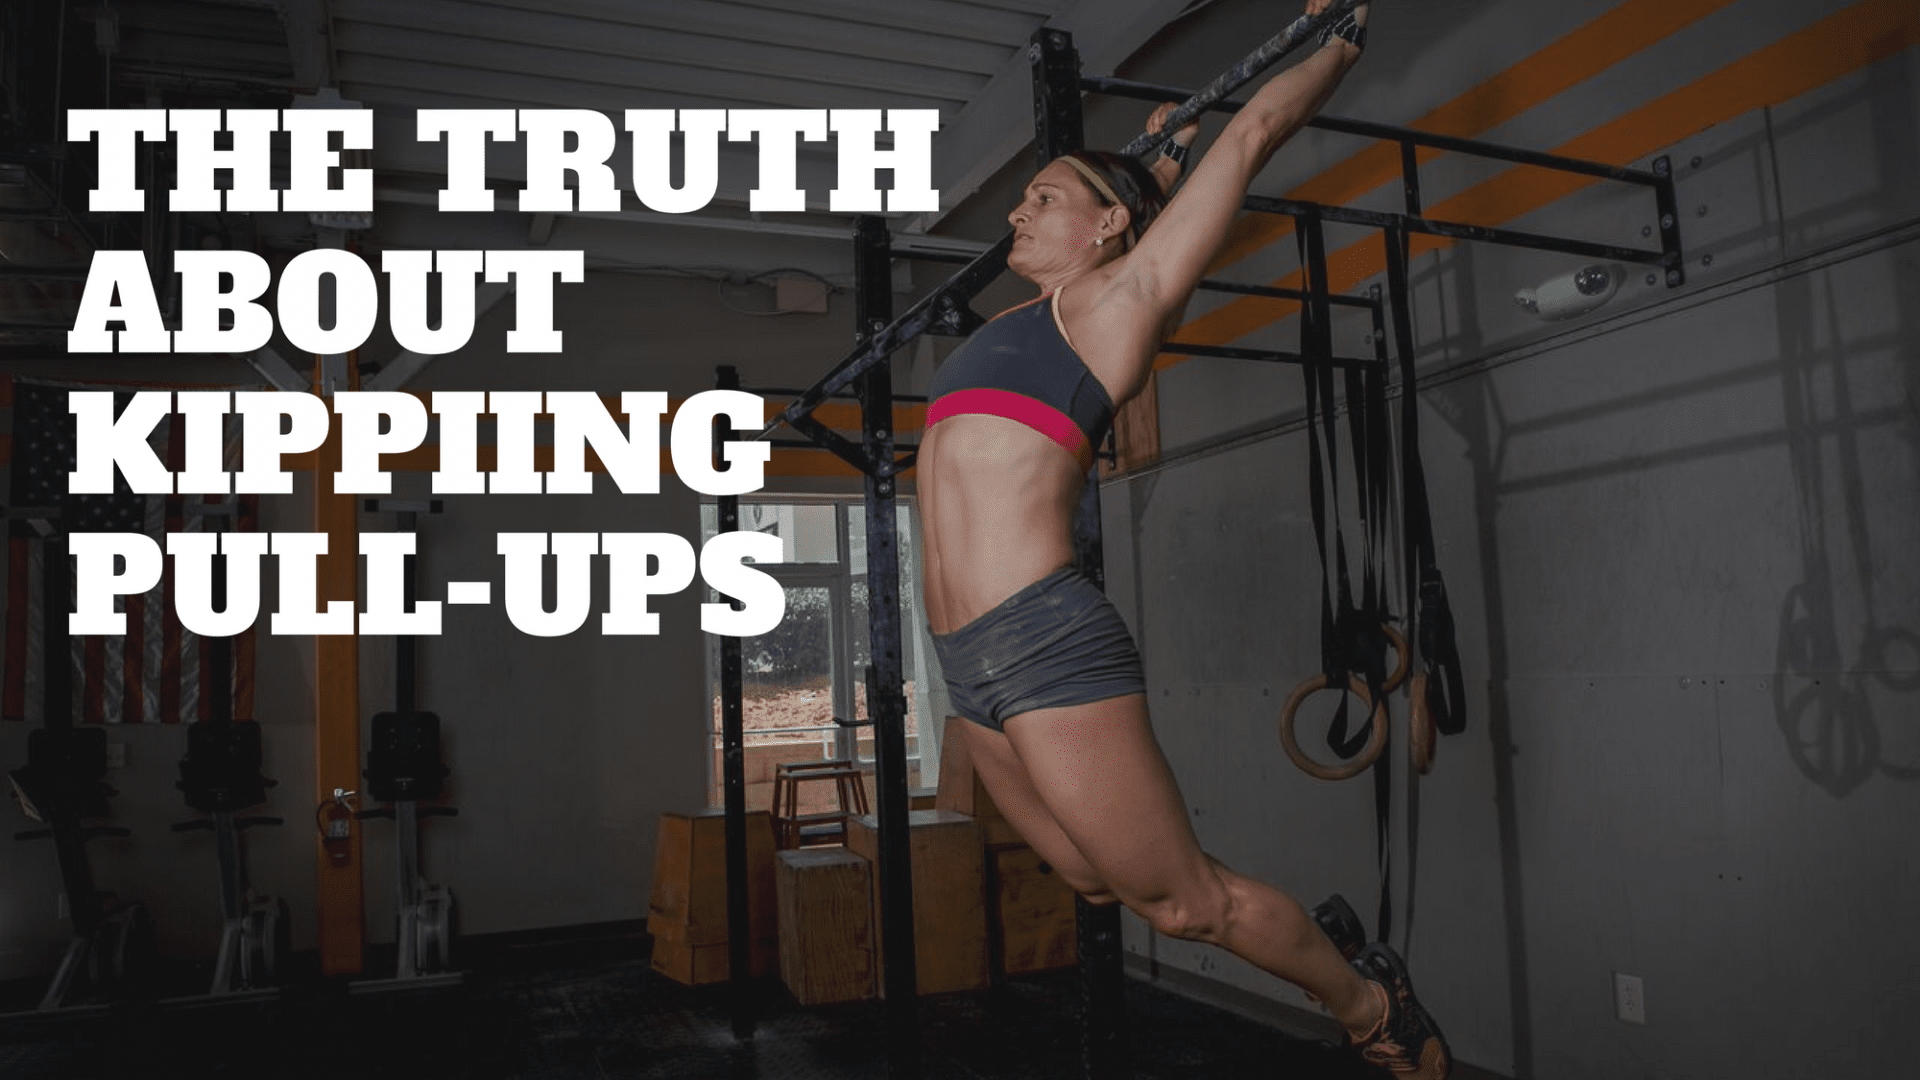 The Truth About Kipping Pull-ups